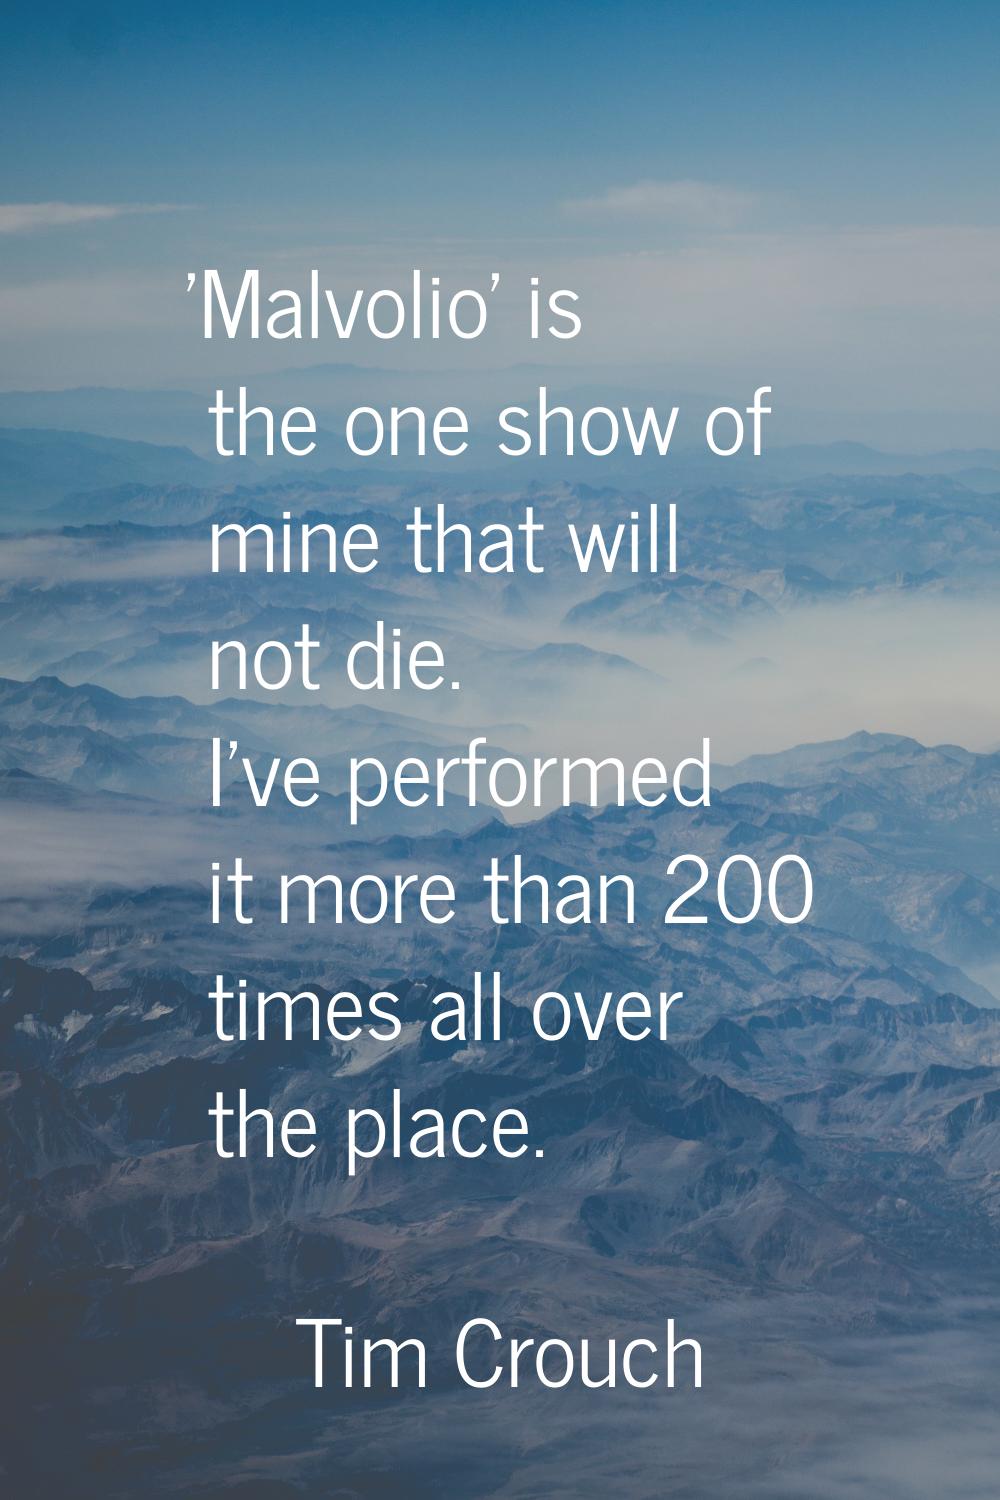 'Malvolio' is the one show of mine that will not die. I've performed it more than 200 times all ove